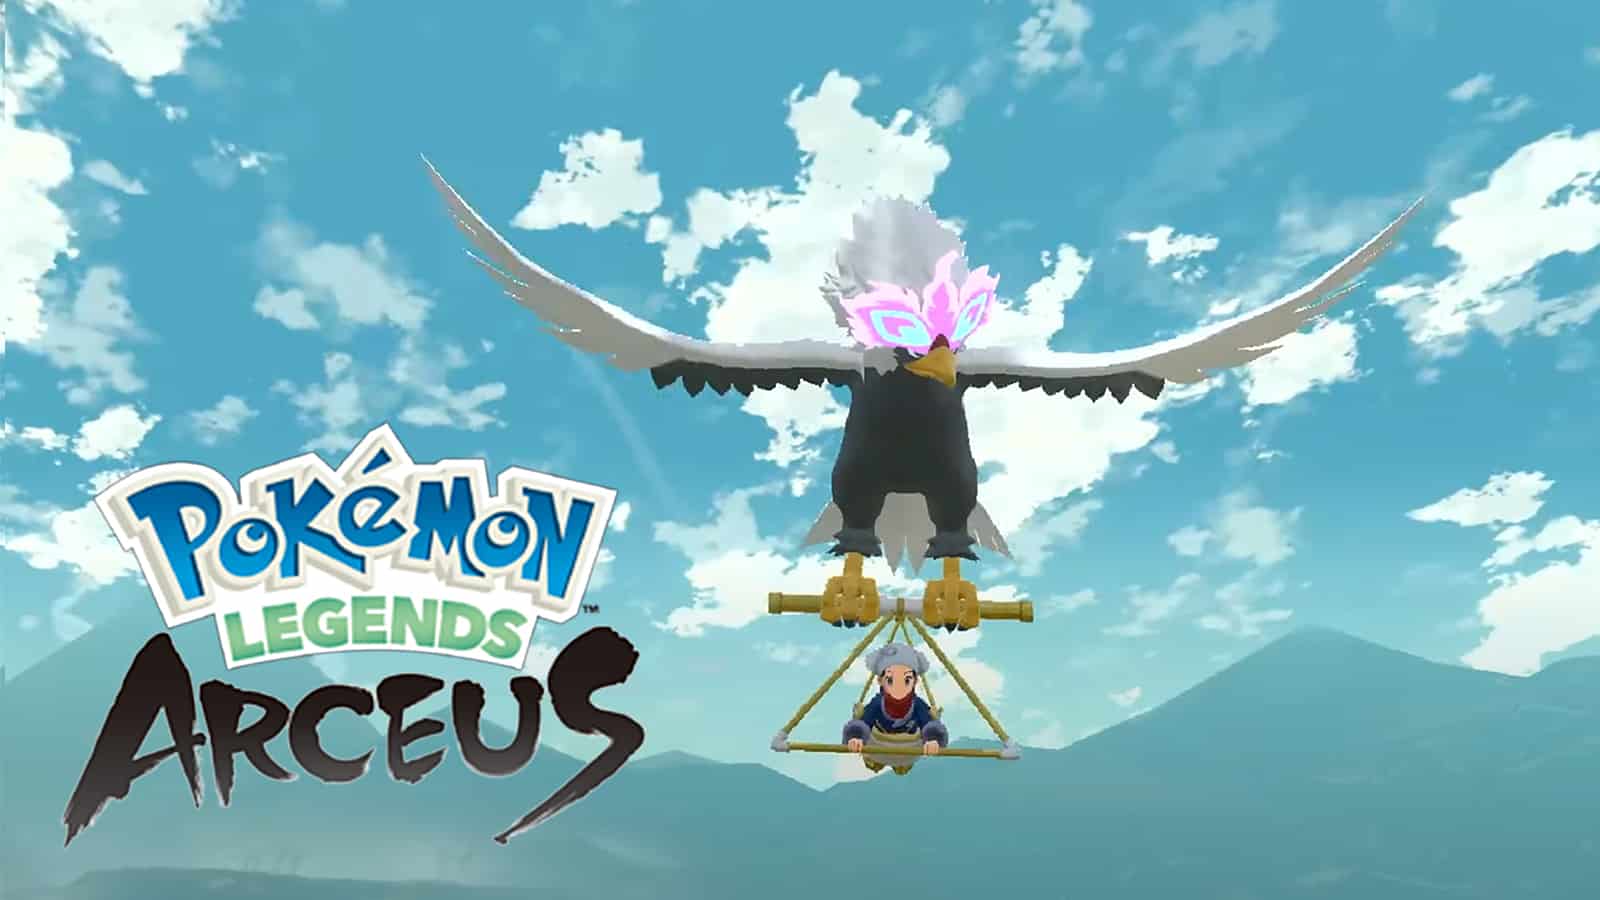 Why a Pokemon Legends Arceus sequel would absolutely need to